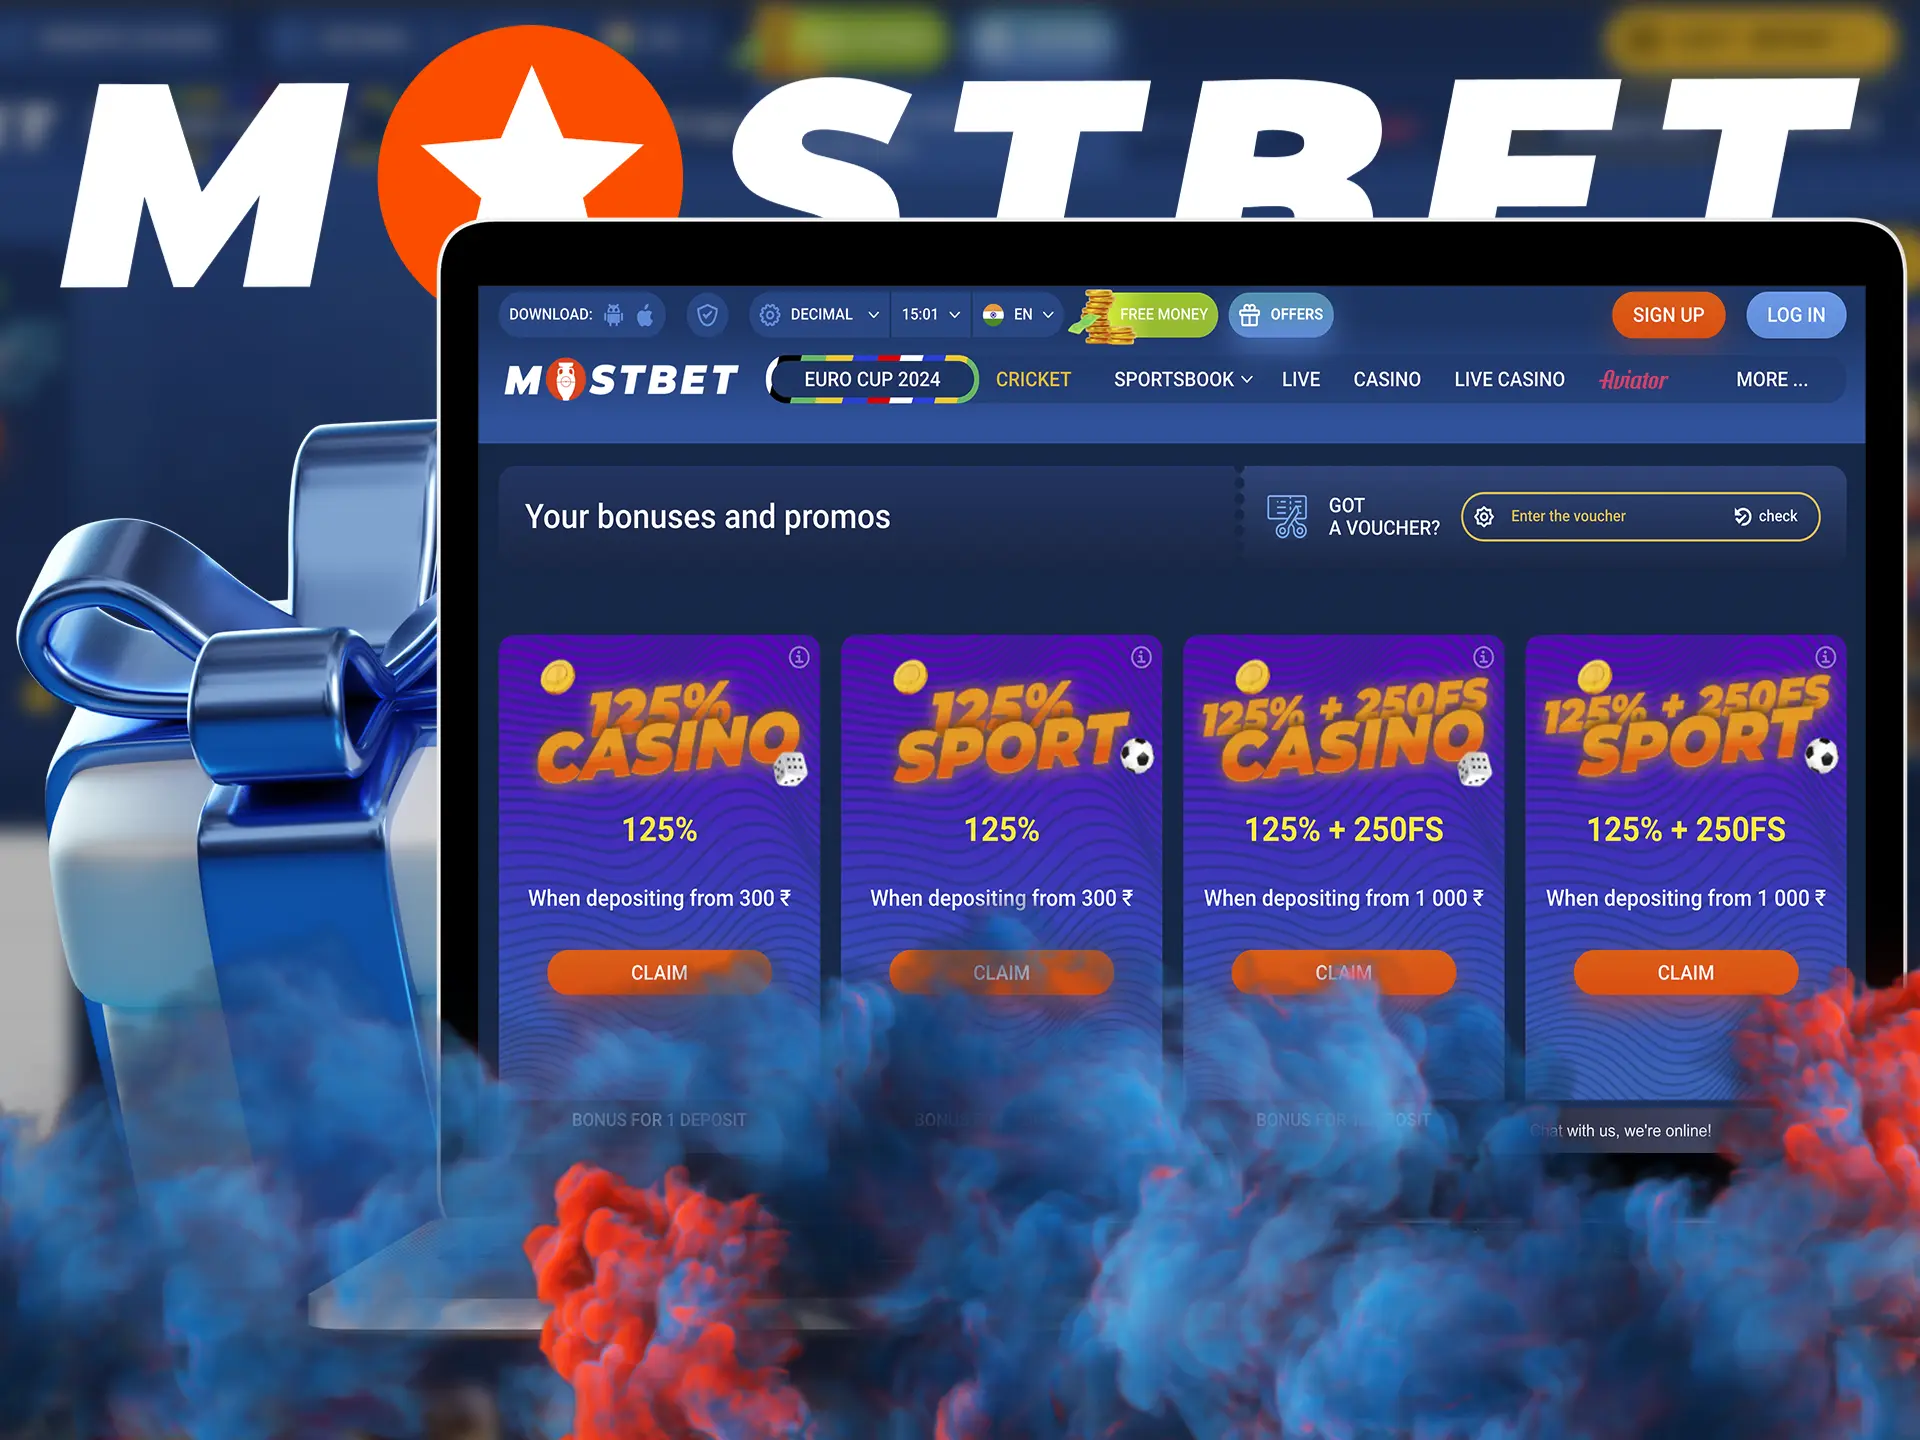 Grab your Mostbet welcome bonus and place your roulette bets with confidence.